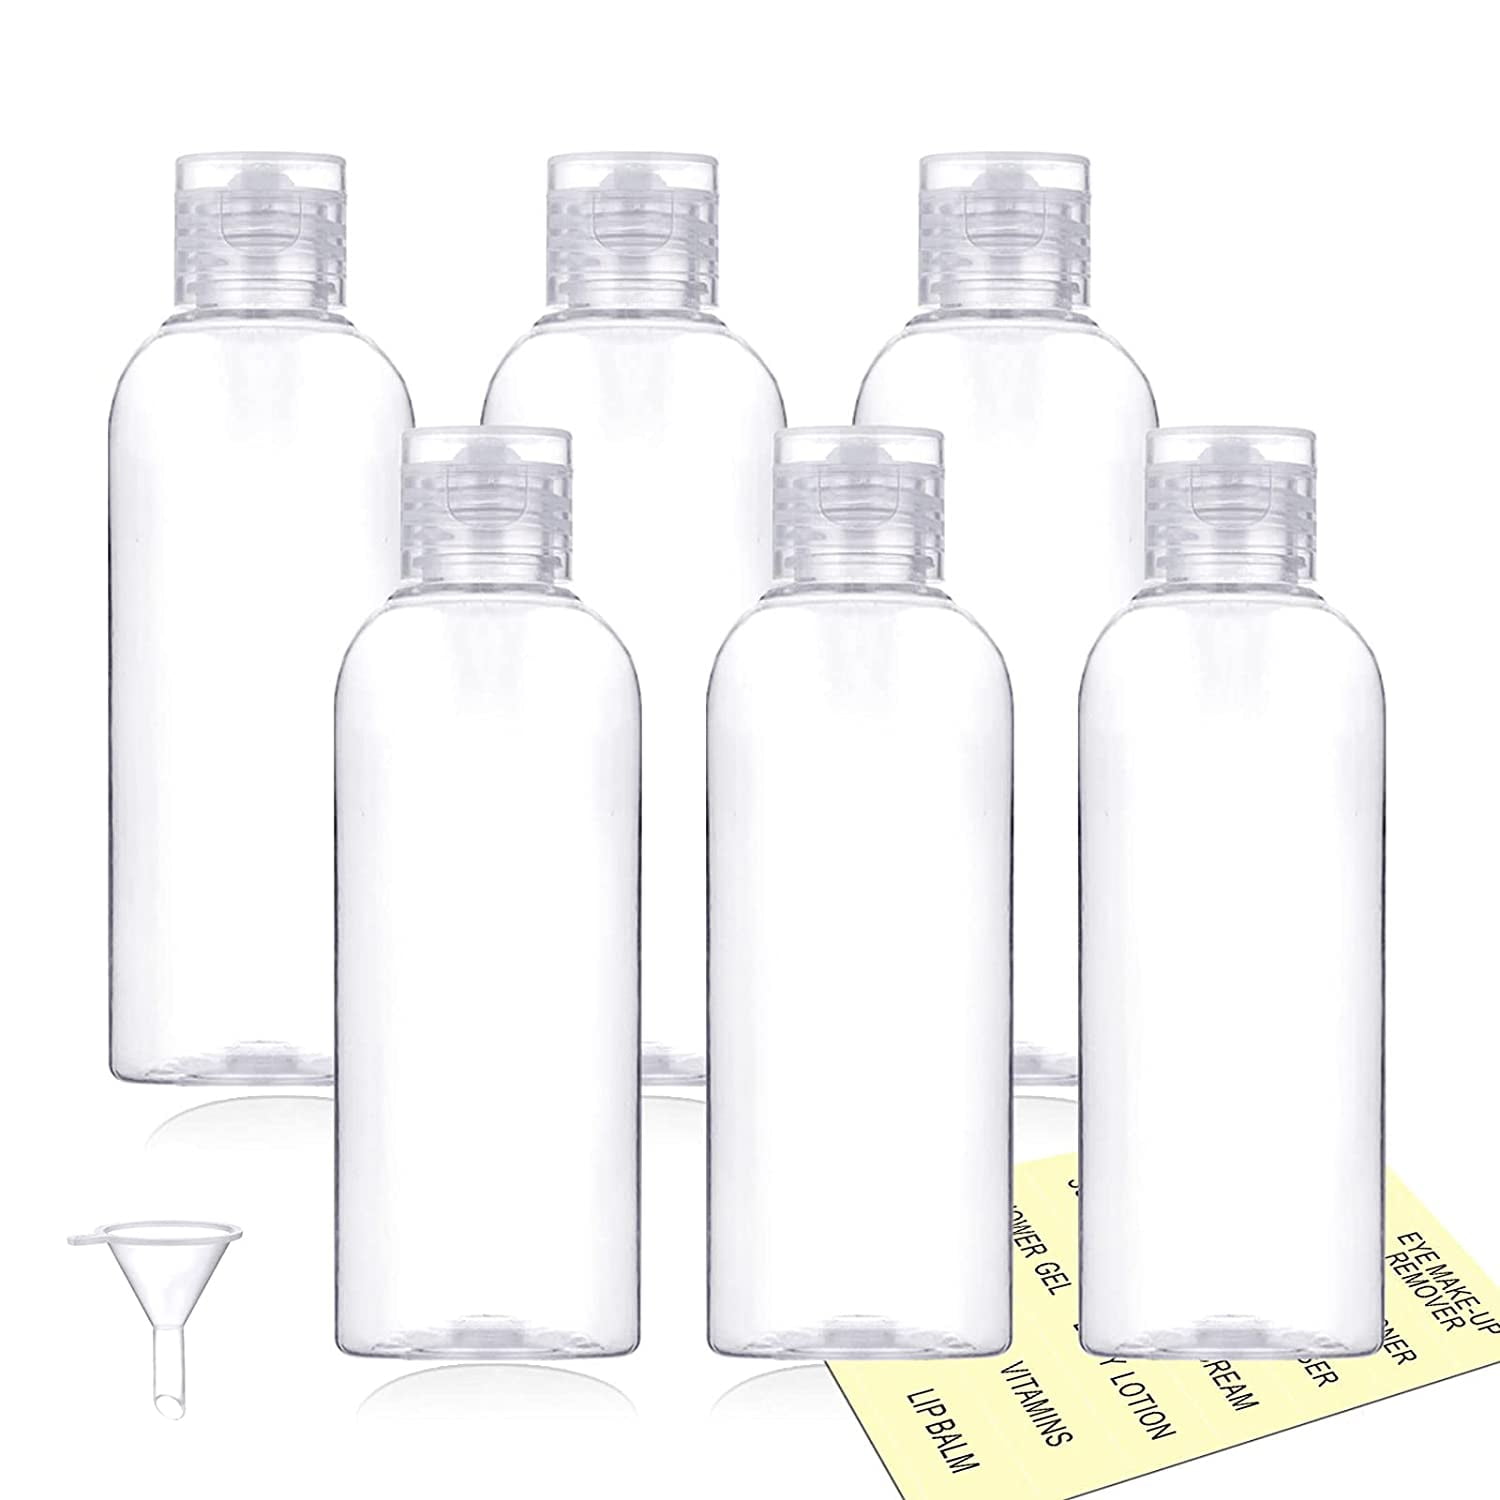 30ml 50ml Travel Size Plastic Squeeze Bottles For Liquids 30ml Makeup  Toiletry Cosmetic Containers Packaging With Flip Lid Omatu From Yi00, $0.5